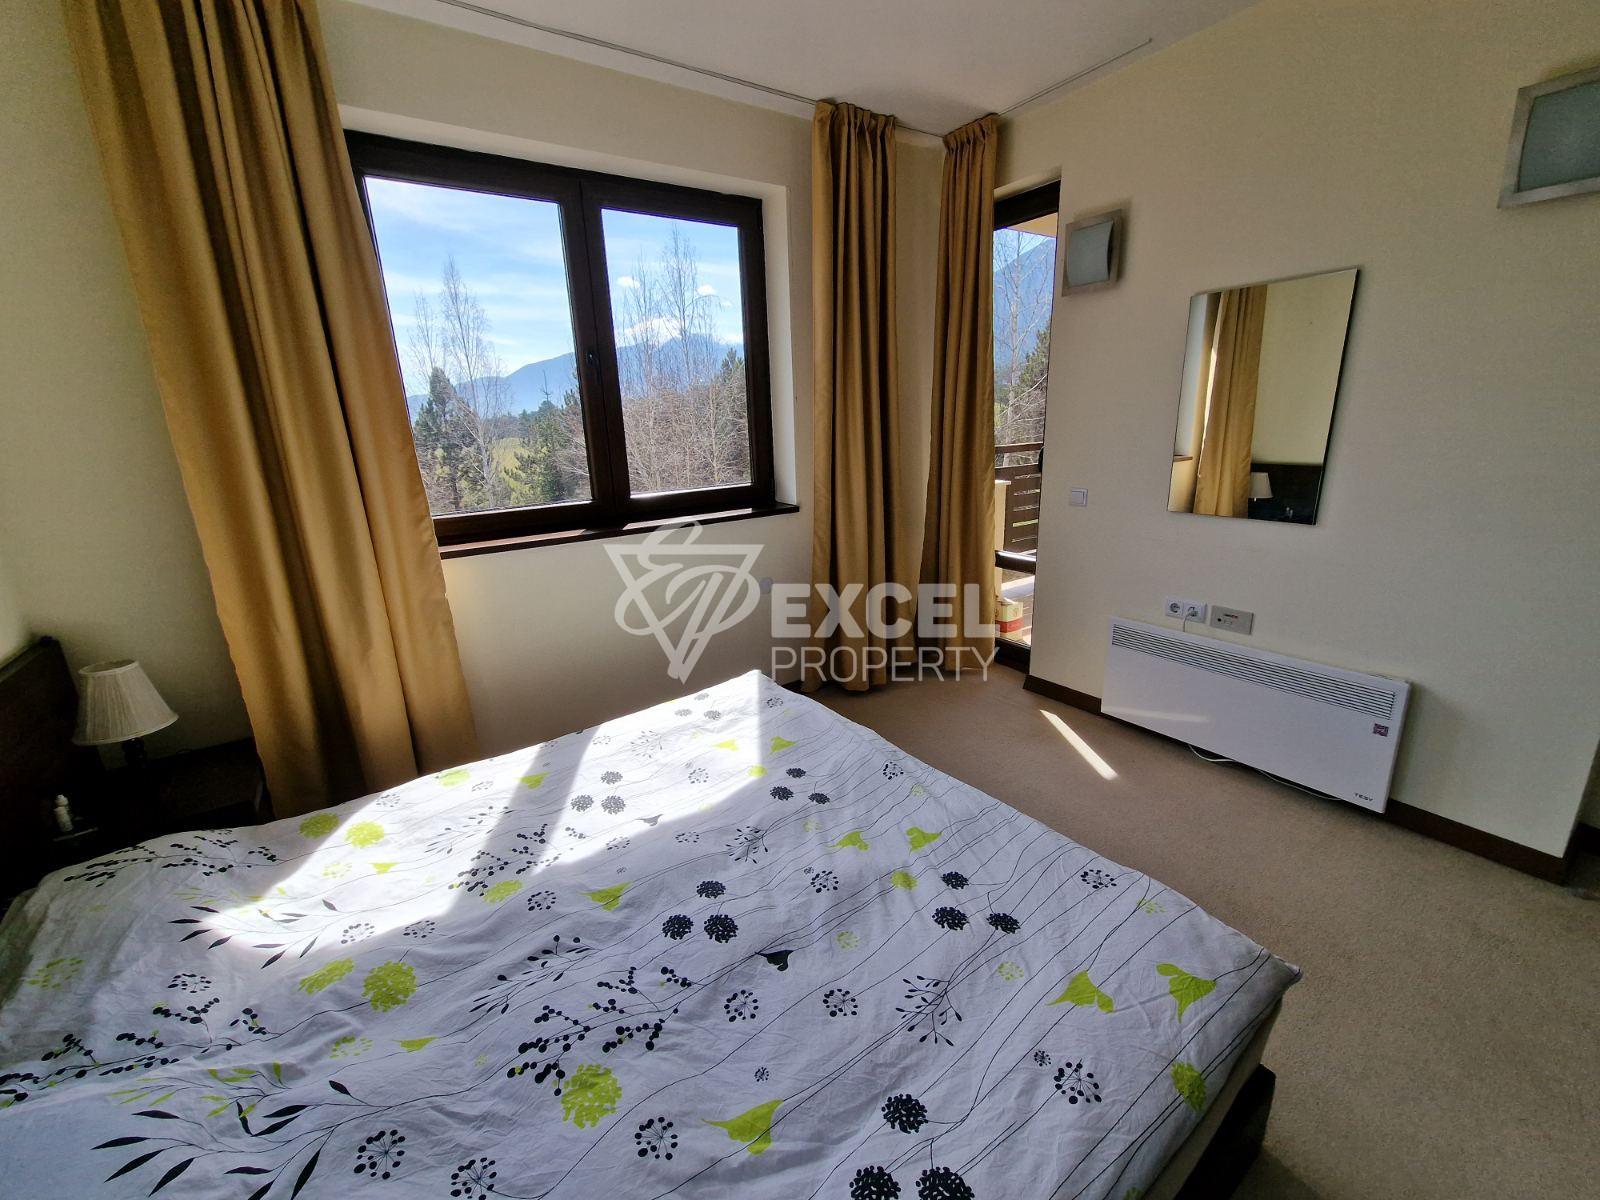 Two-bedroom apartment for sale with a view of the Pirin Mountains near Bansko